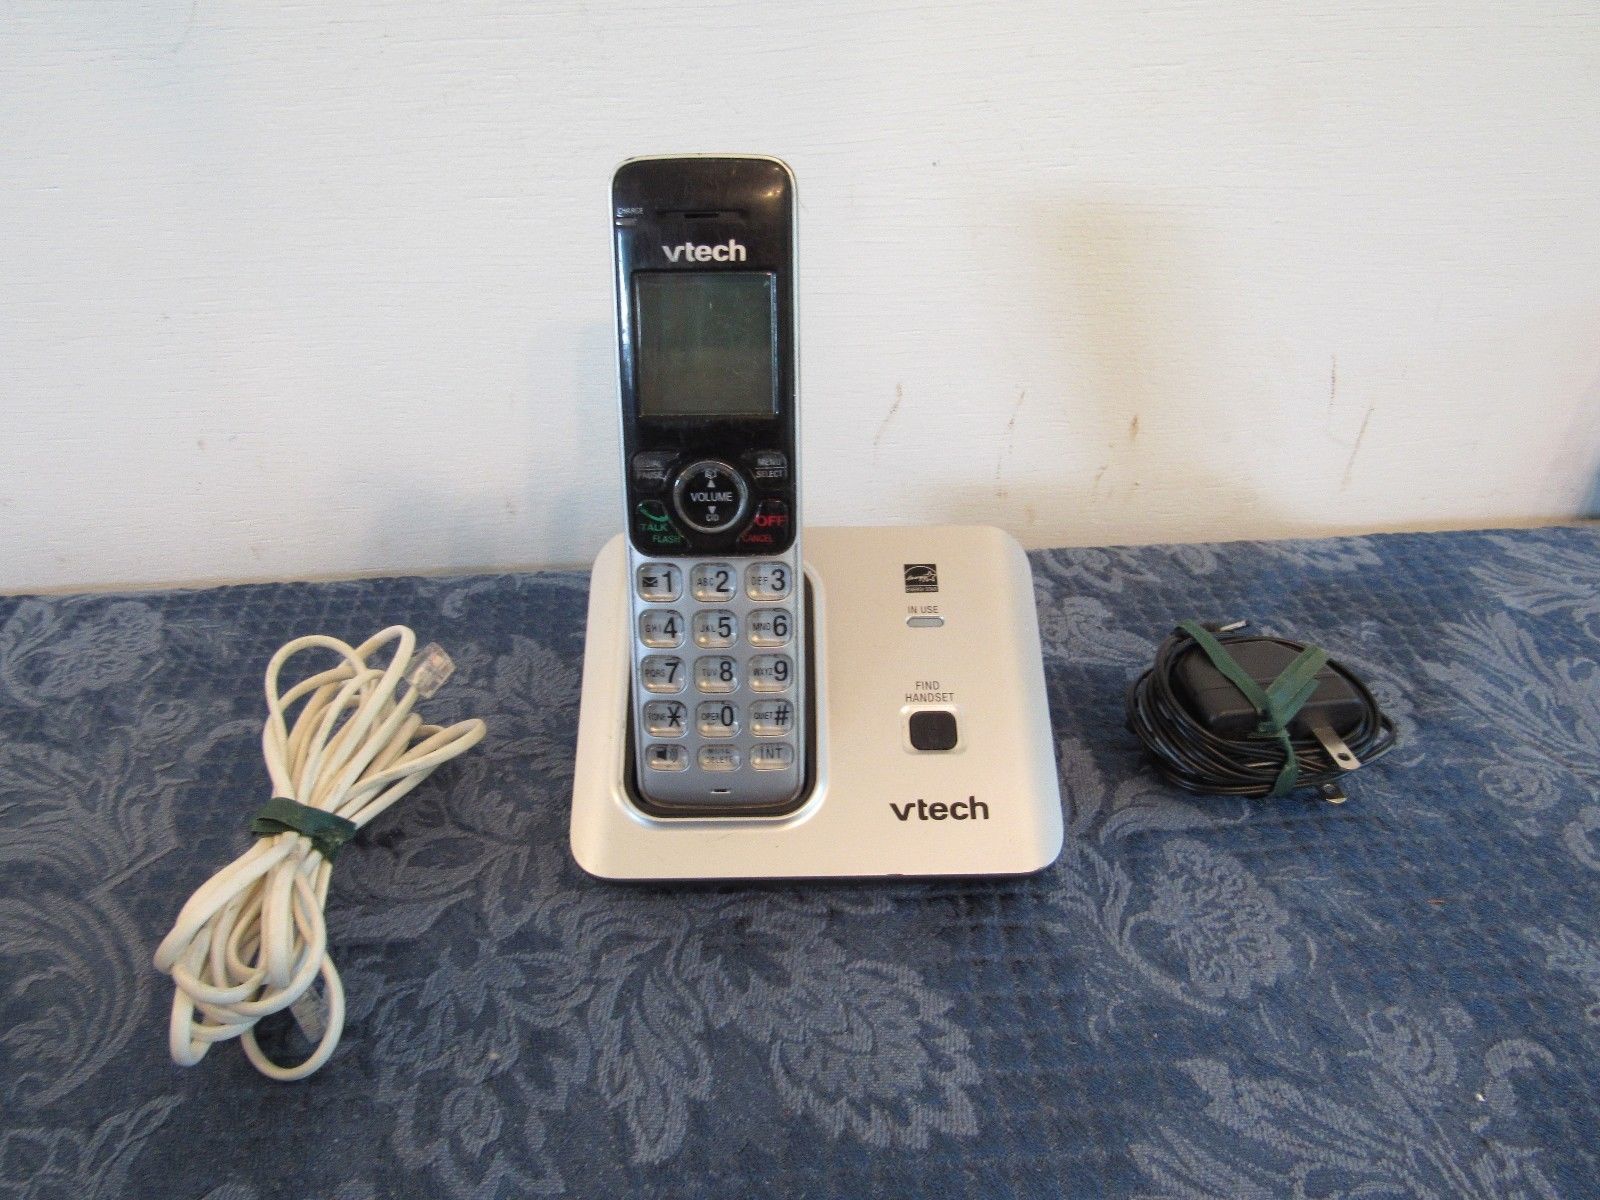 Vtech Cordless Phone System CS6619 + Base & Power Adapter Replacement - $14.91